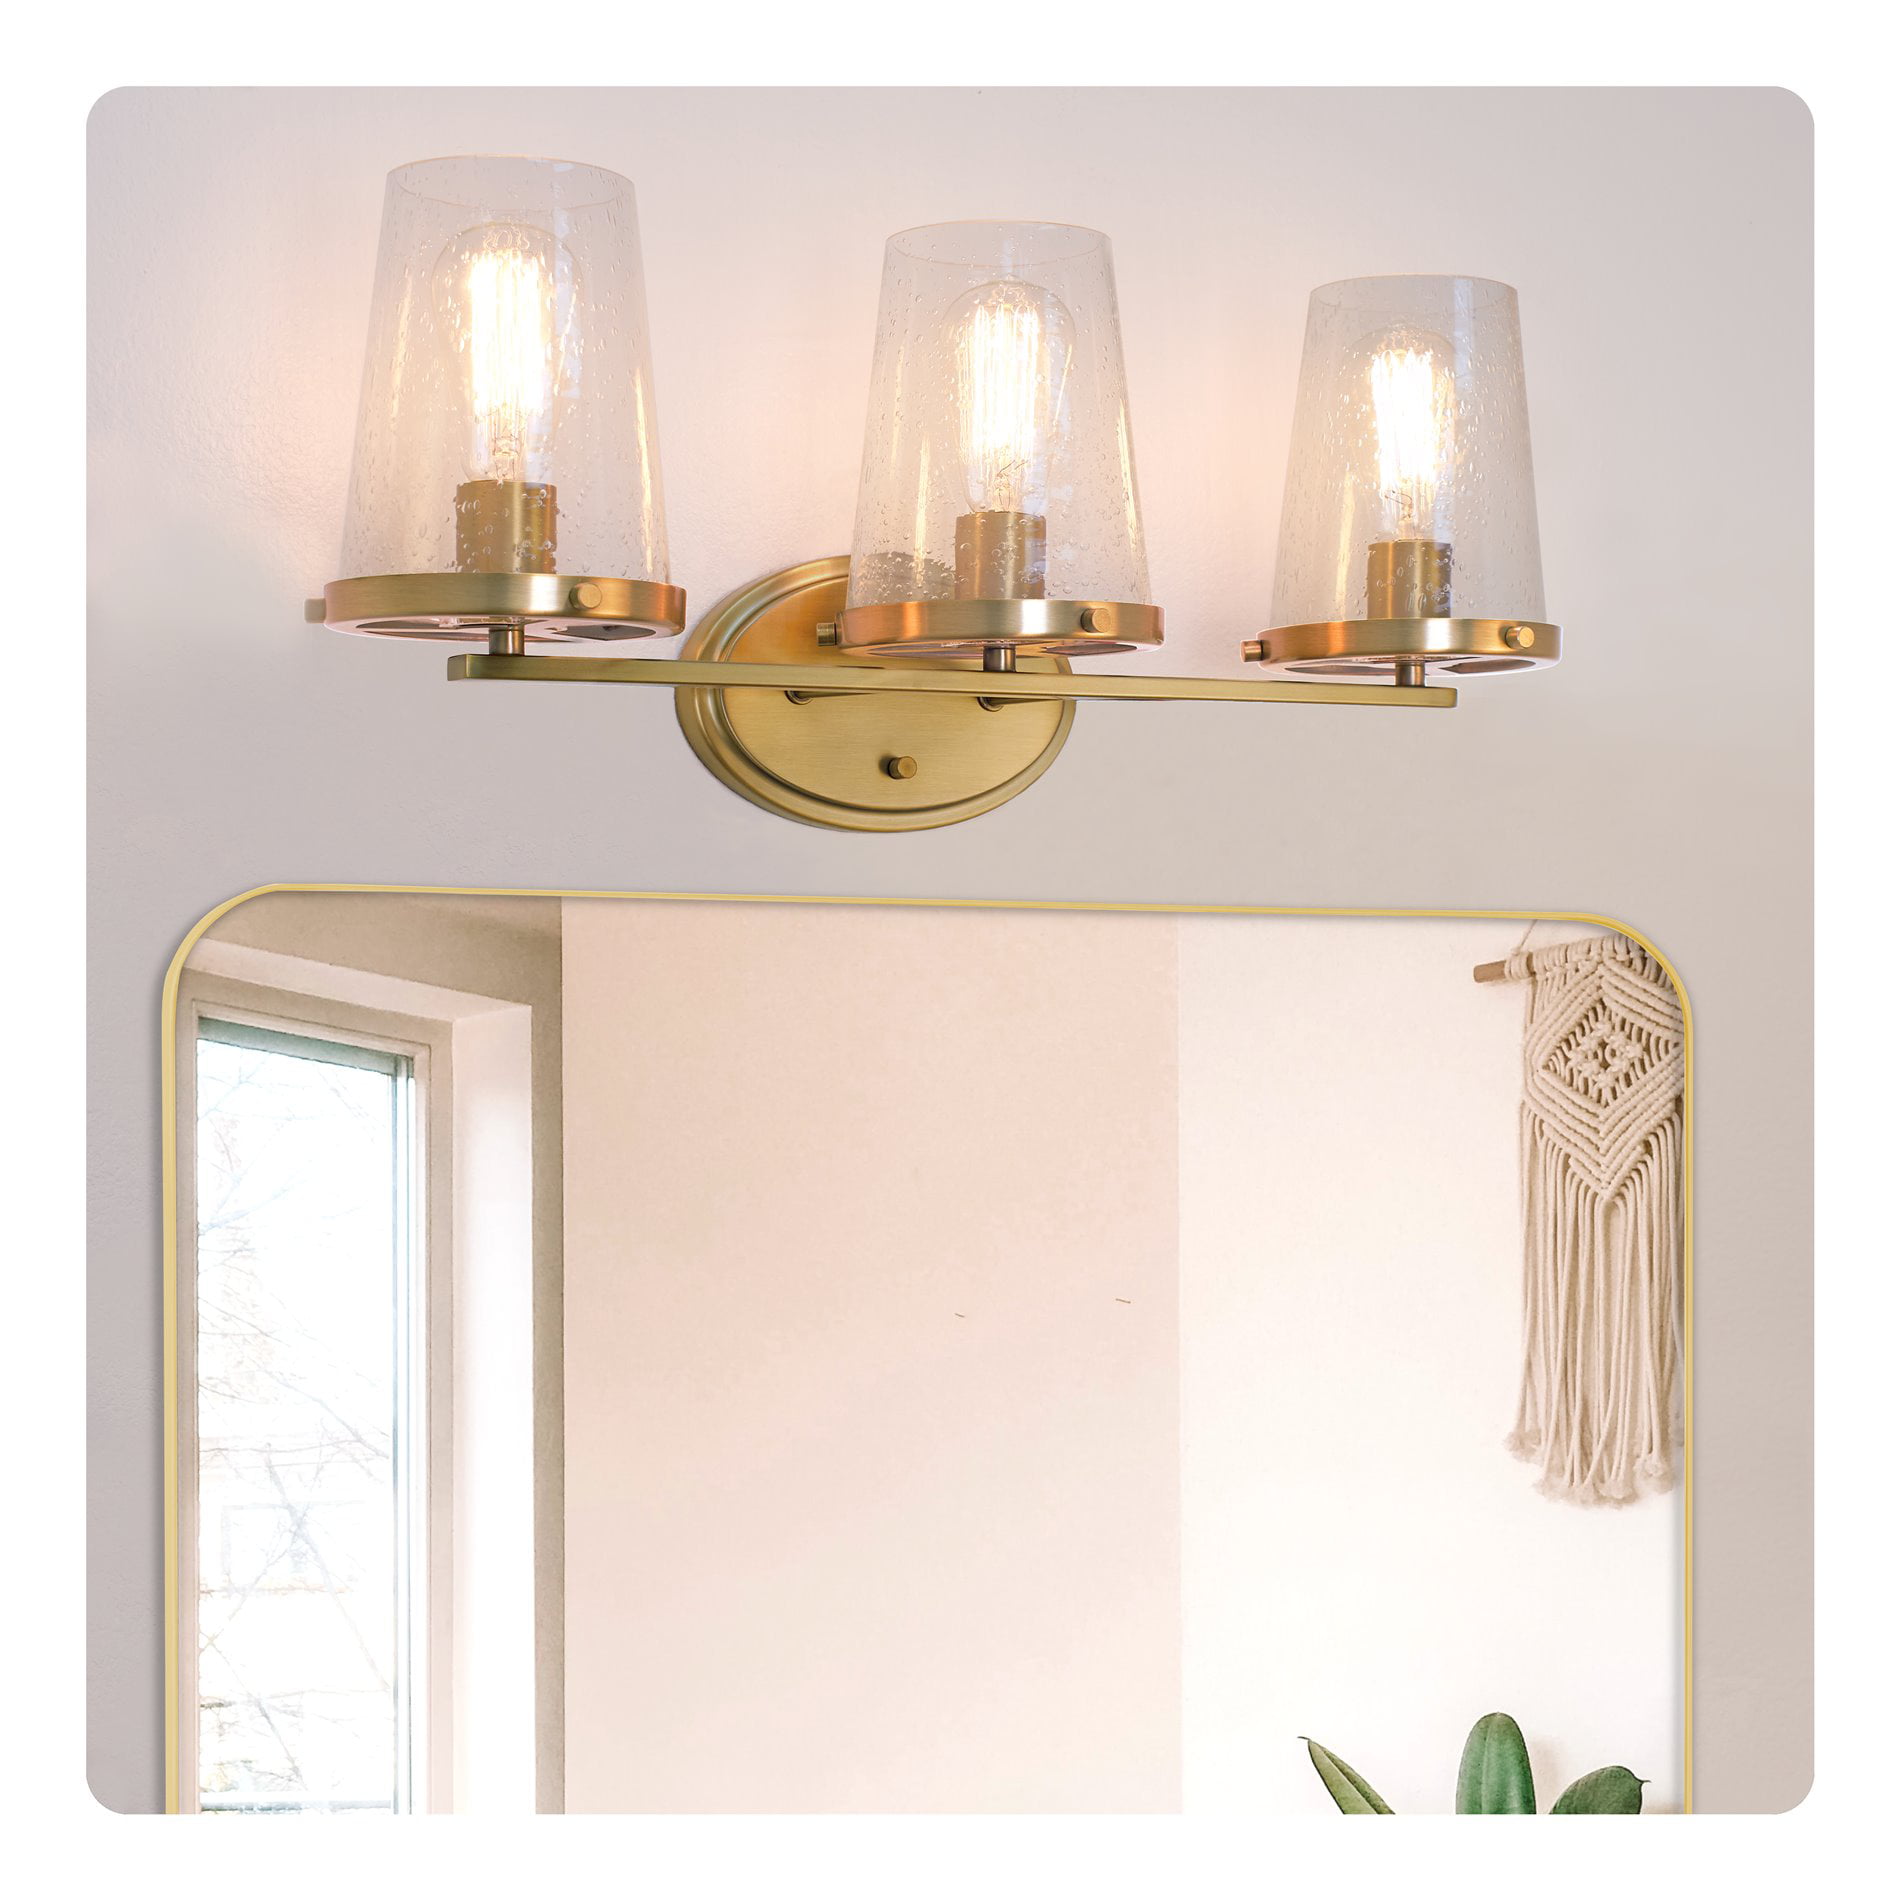 Details about  / 3-Light Wall Sconce Modern Bathroom Vanity Light Fixtures w// Clear Glass Shade